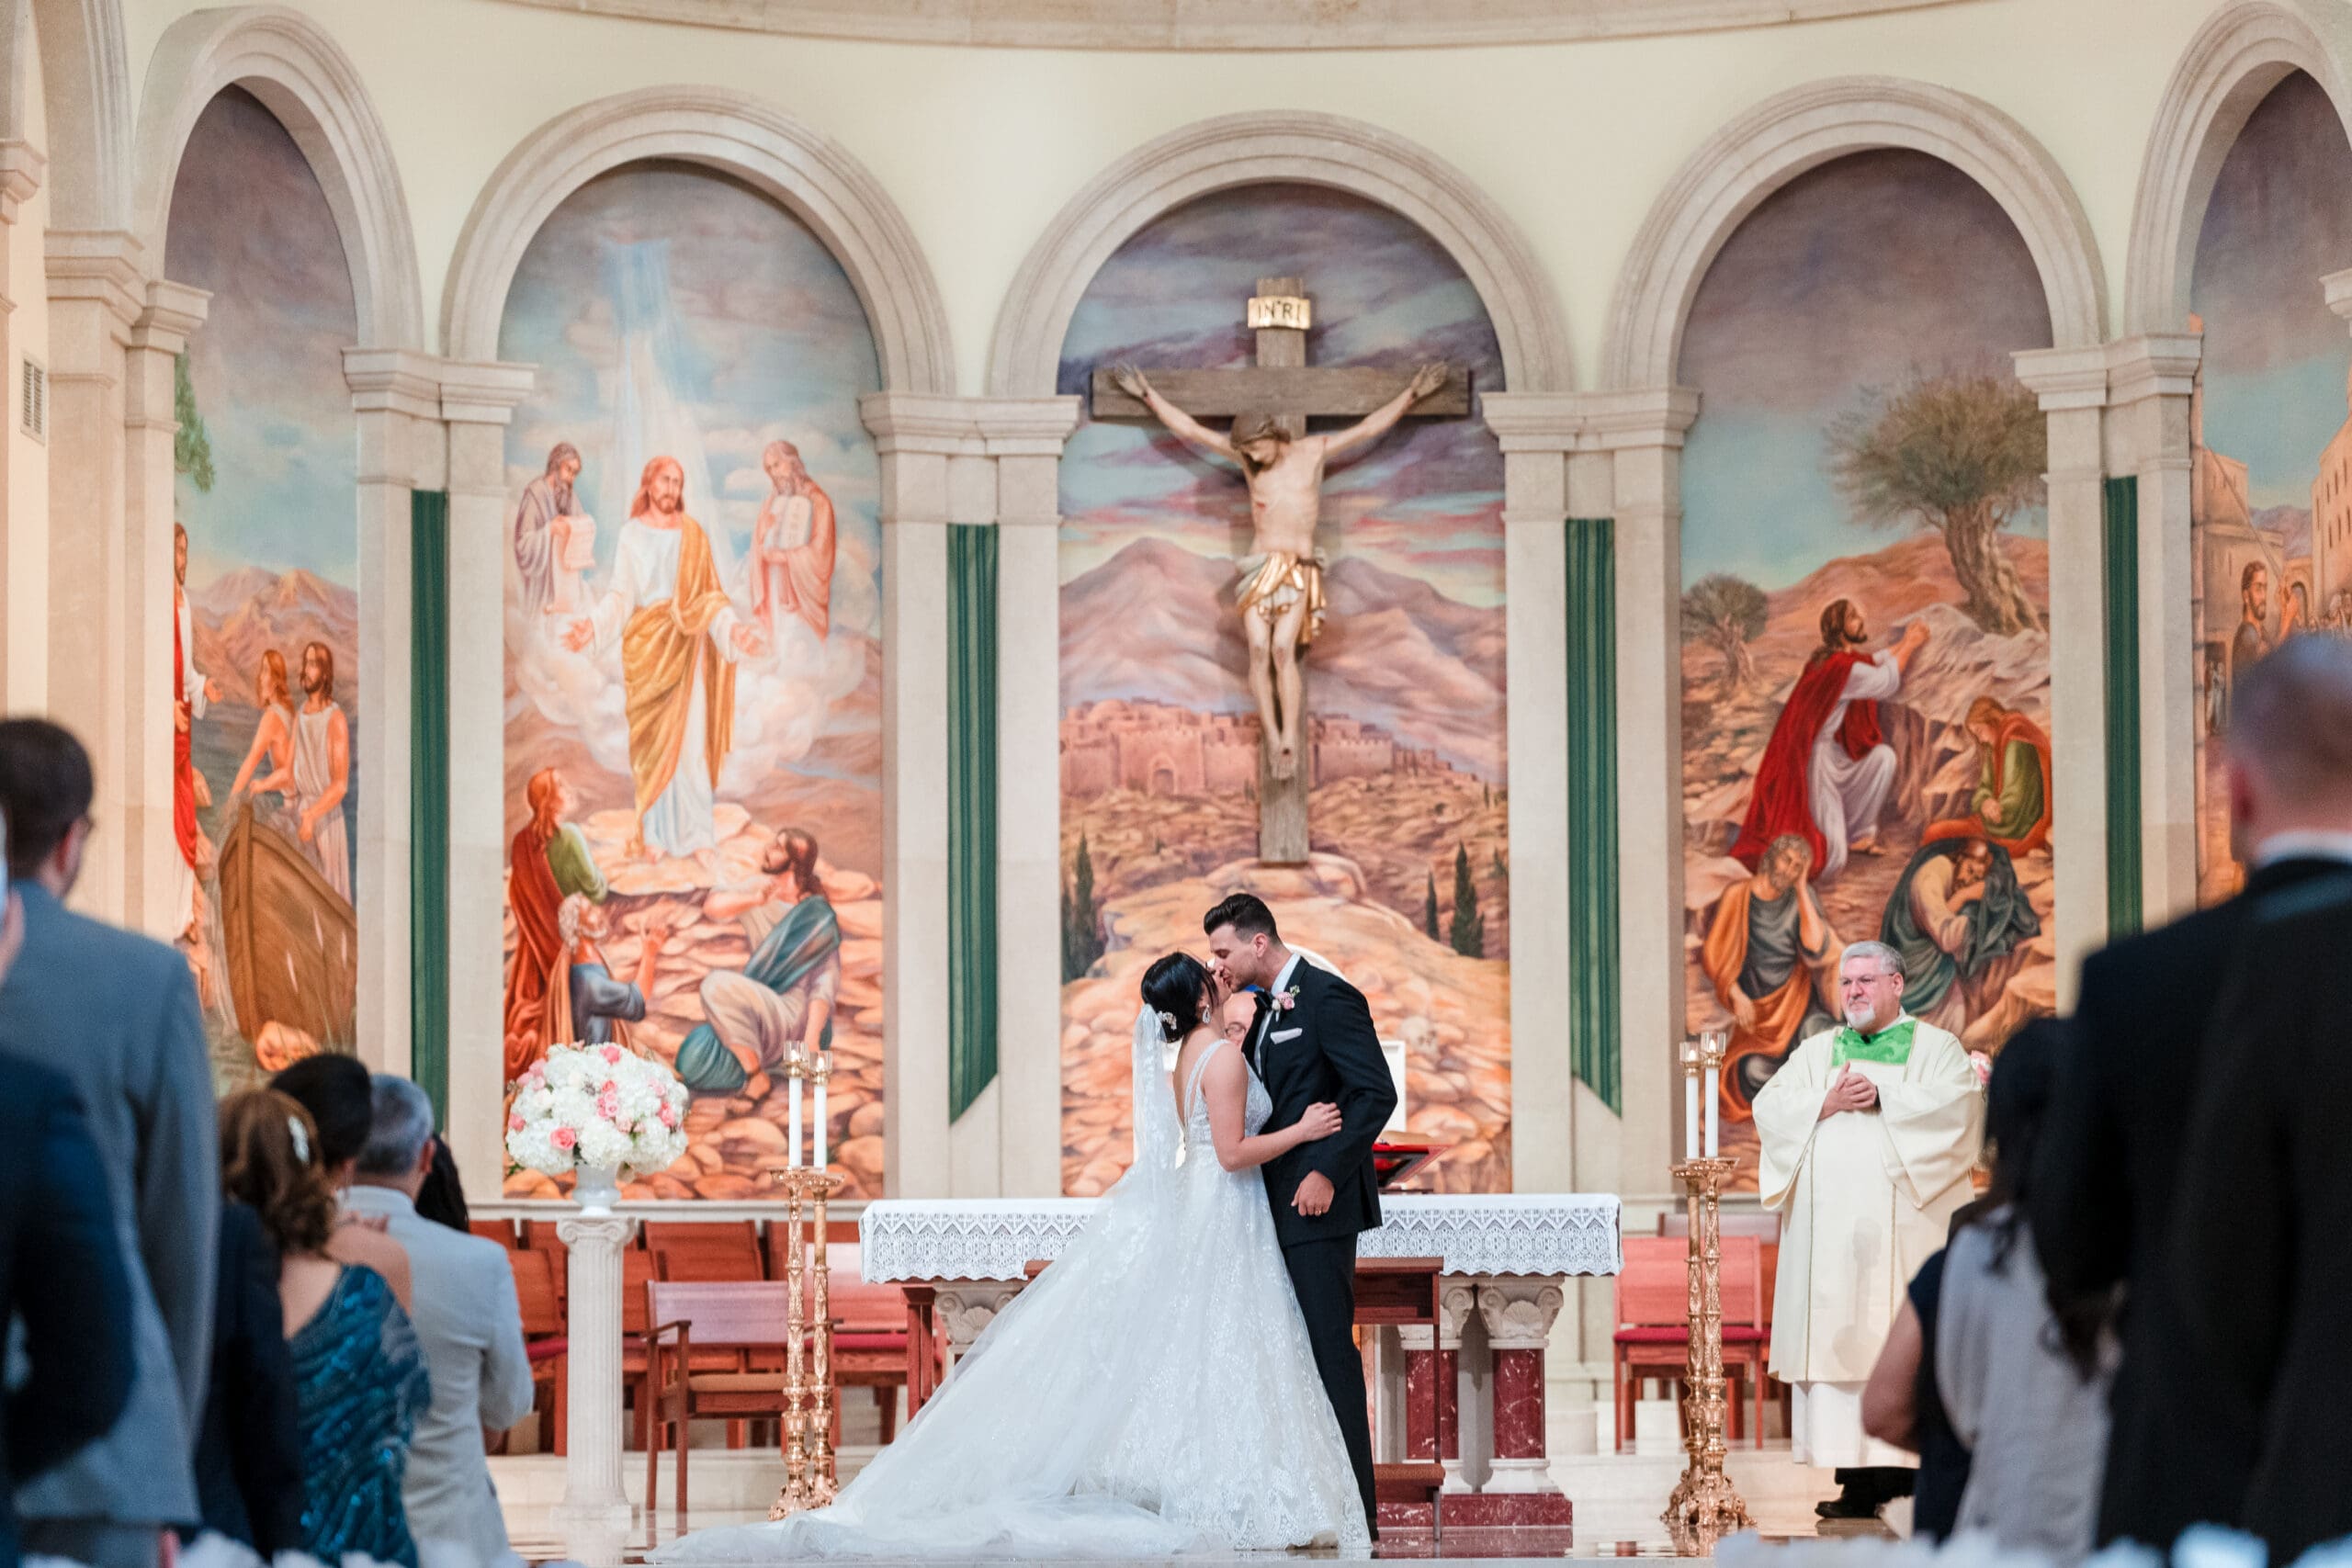 Wide shot capturing the 'I do' kiss at the altar of St. James Cathedral, with the stunning artwork in the dome above.